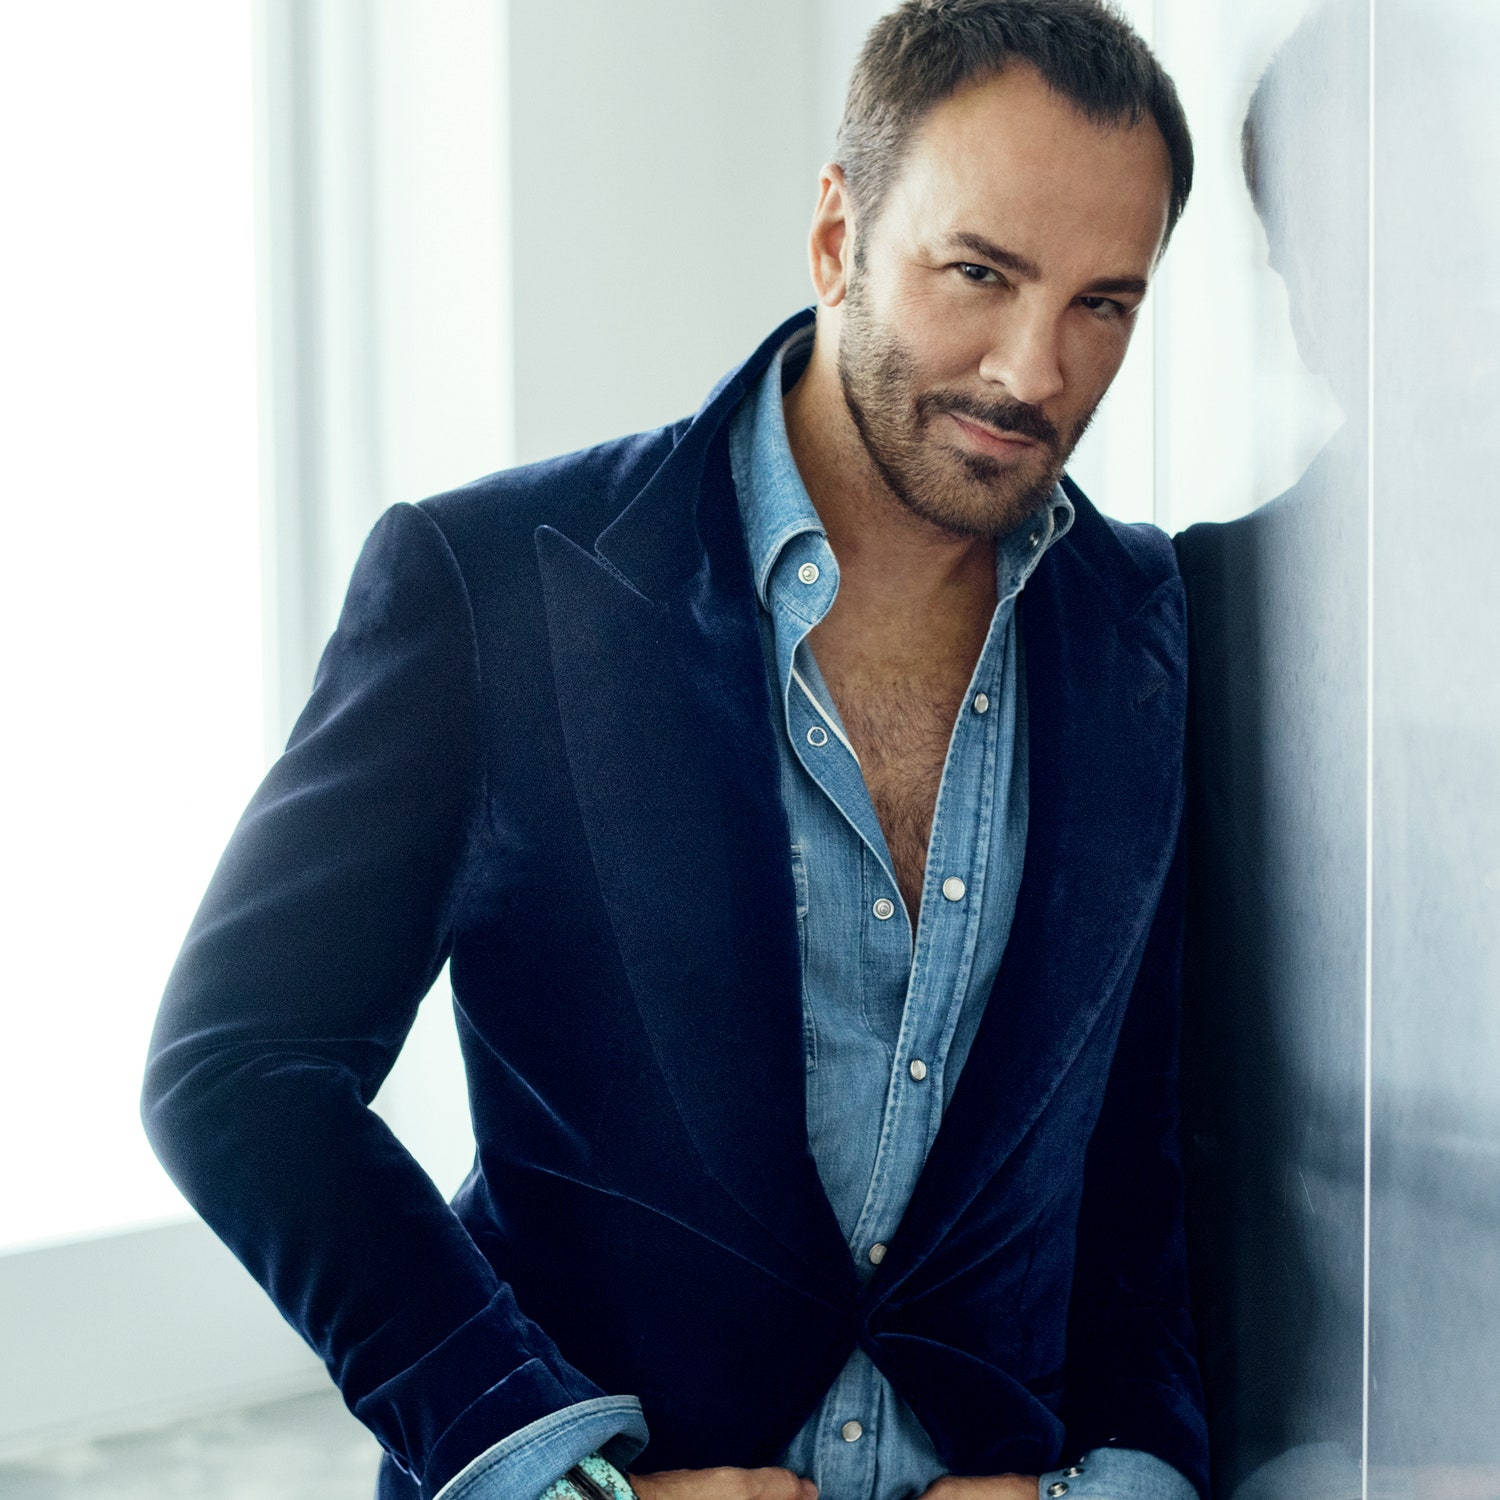 Tom Ford In Blue Outfit Wallpaper